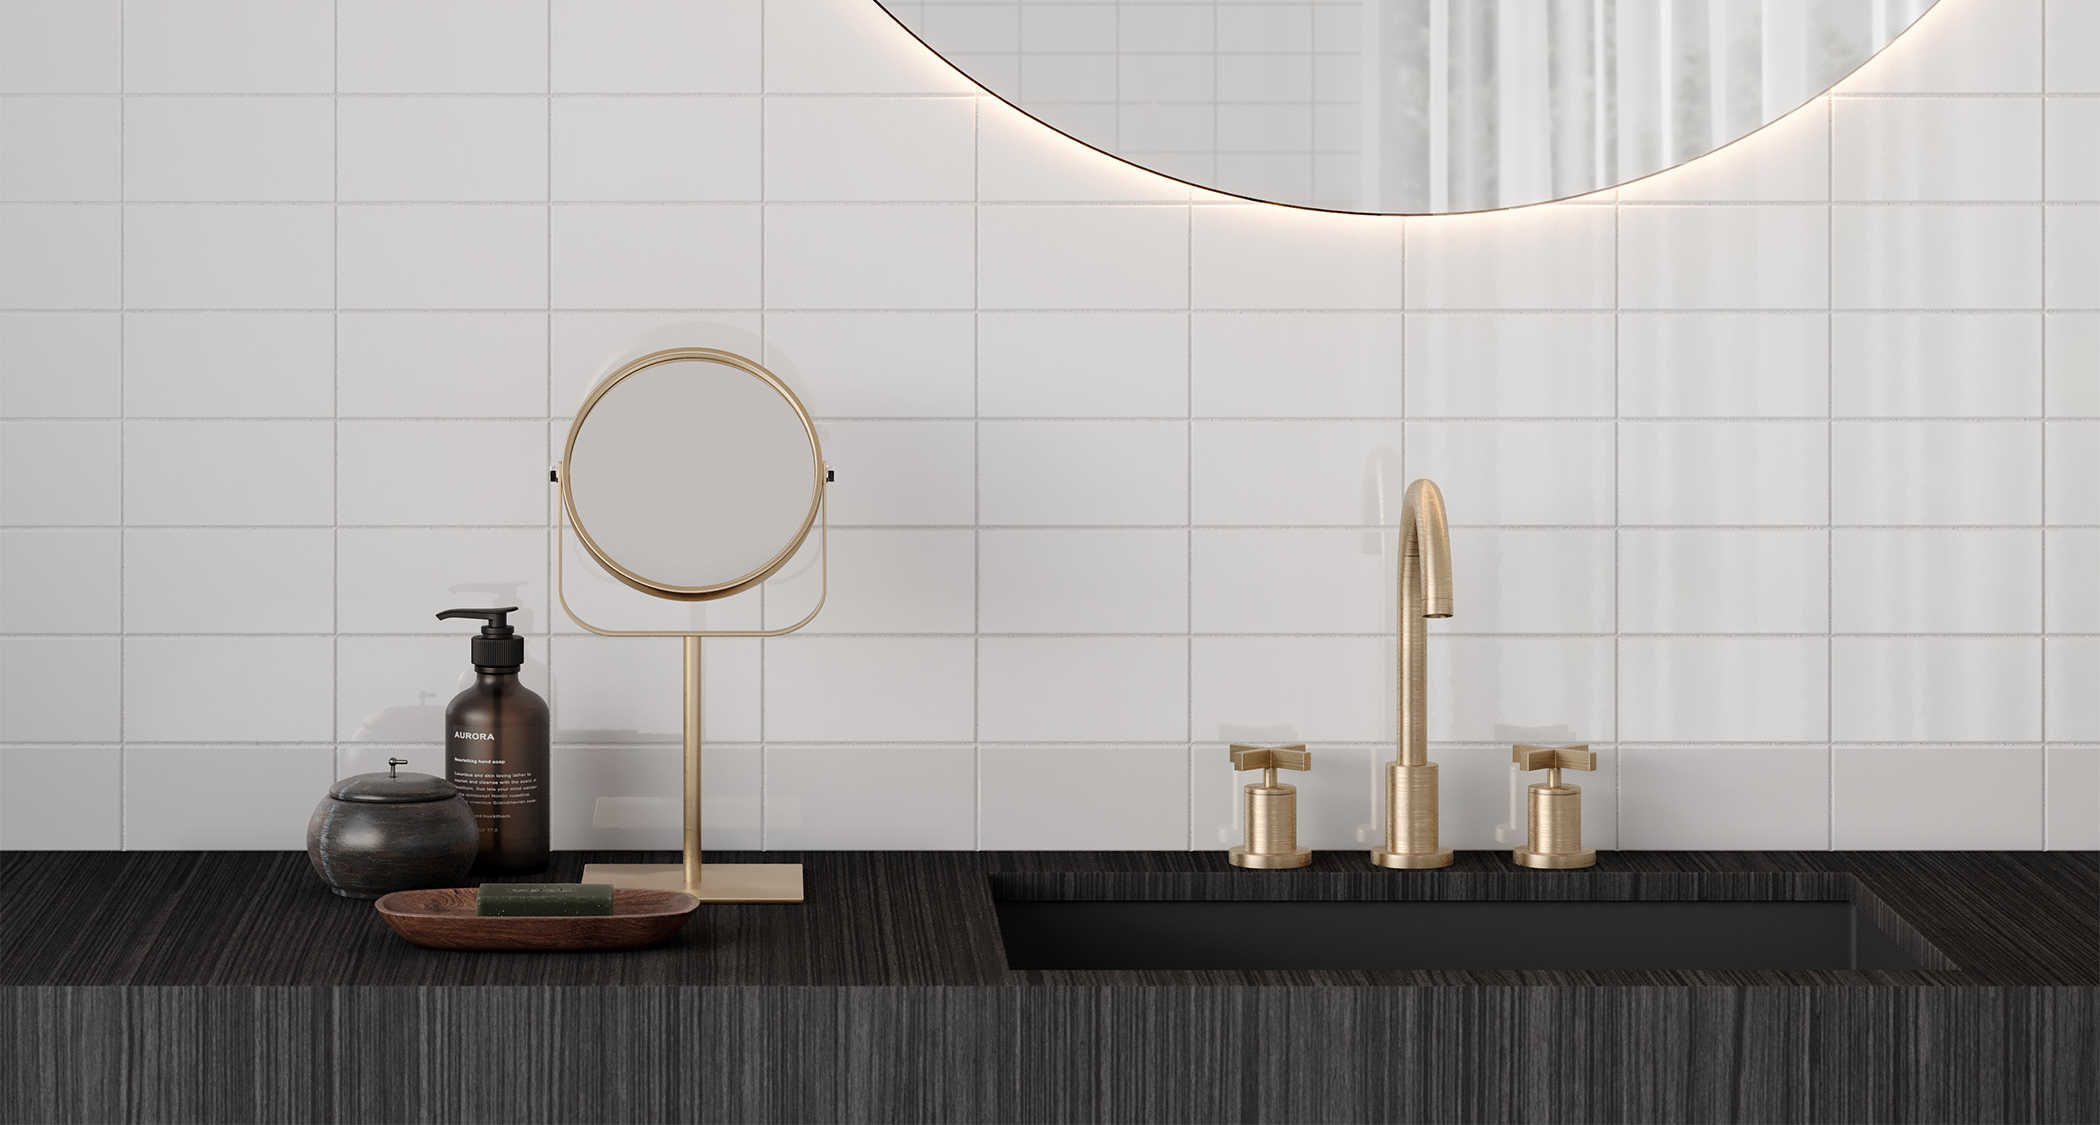 White Ceramic Subway Tile in bathroom on wall with brass faucet and dark vanity